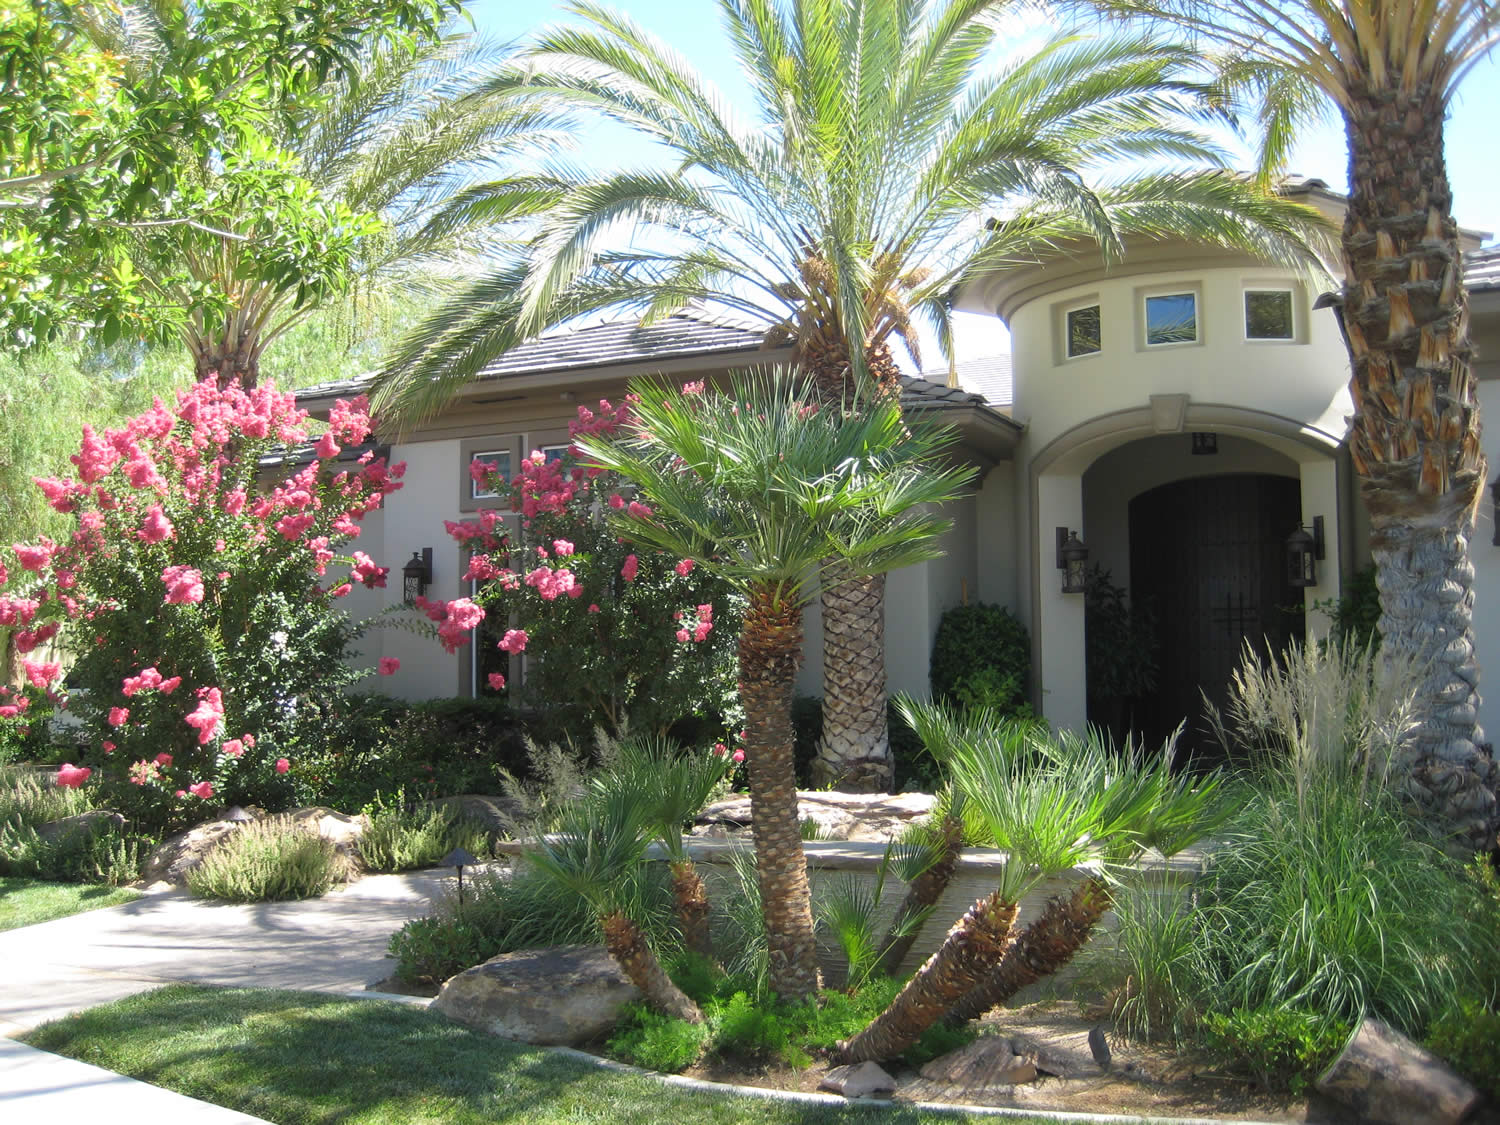 Jonathan Spears landscape architectural designs Nevada and California